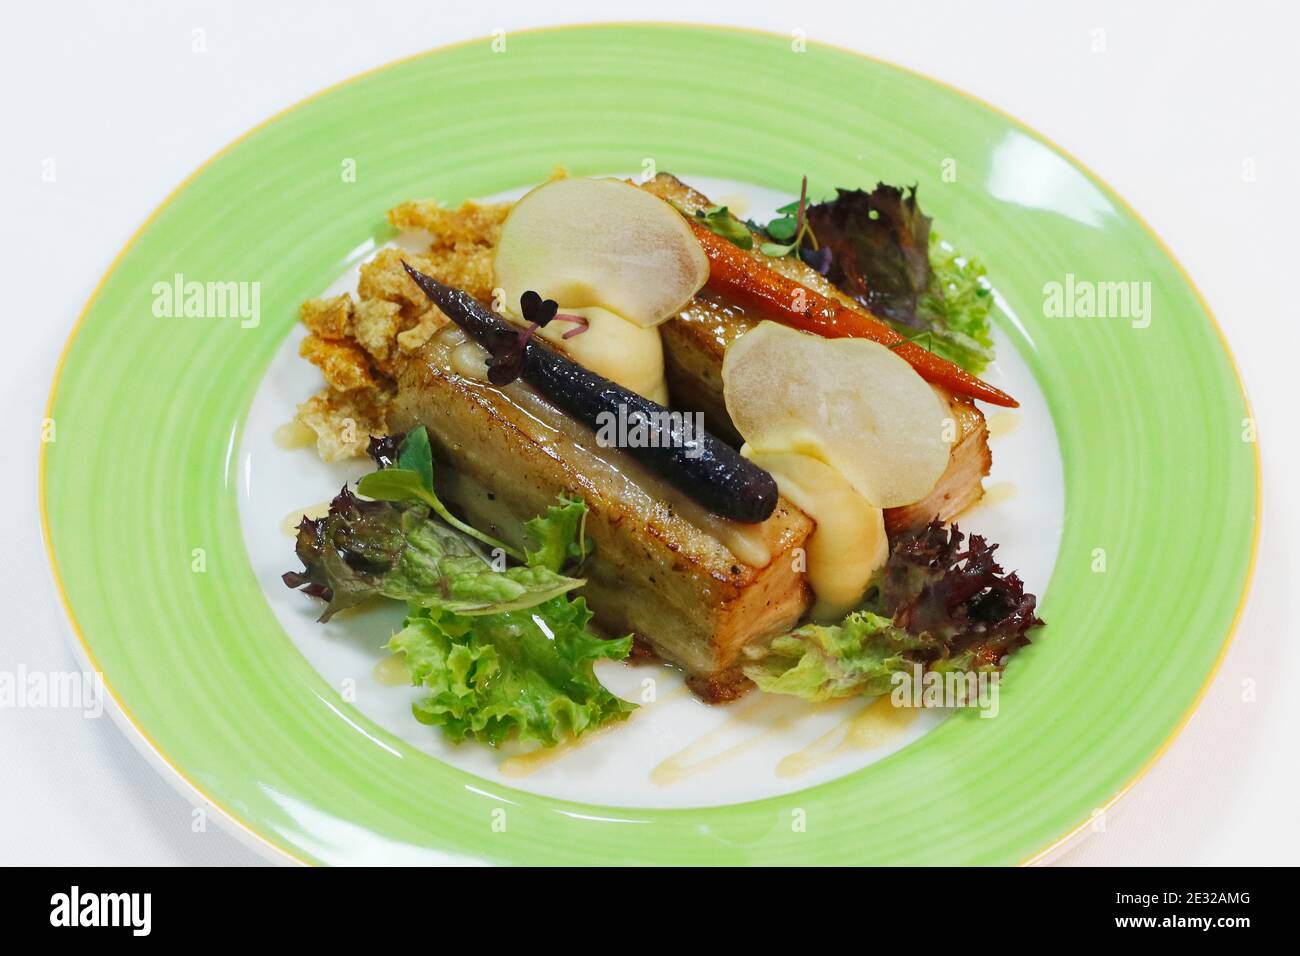 roasted pork belly with crackling, salad leaves and mash potato Stock Photo